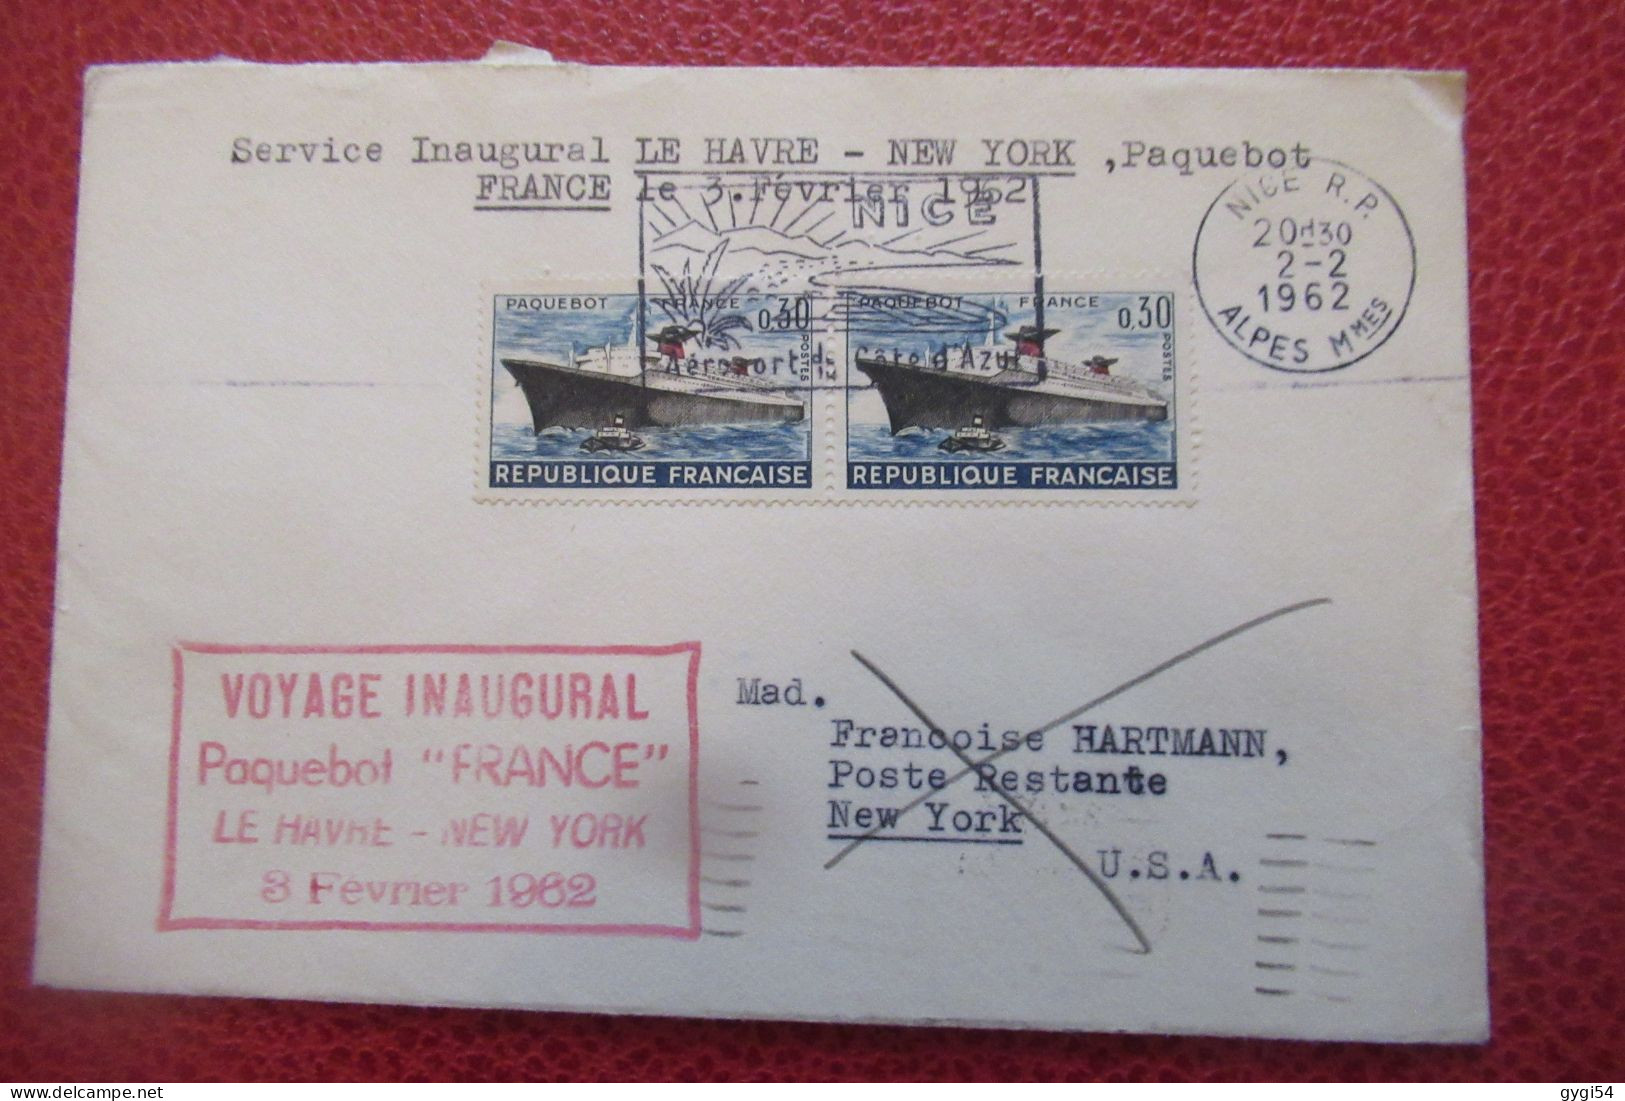 VOYAGE  INAUGURAL  Paquebot FRANCE  LE HAVRE - NEW - YORK  08 02 1962 - Covers & Documents